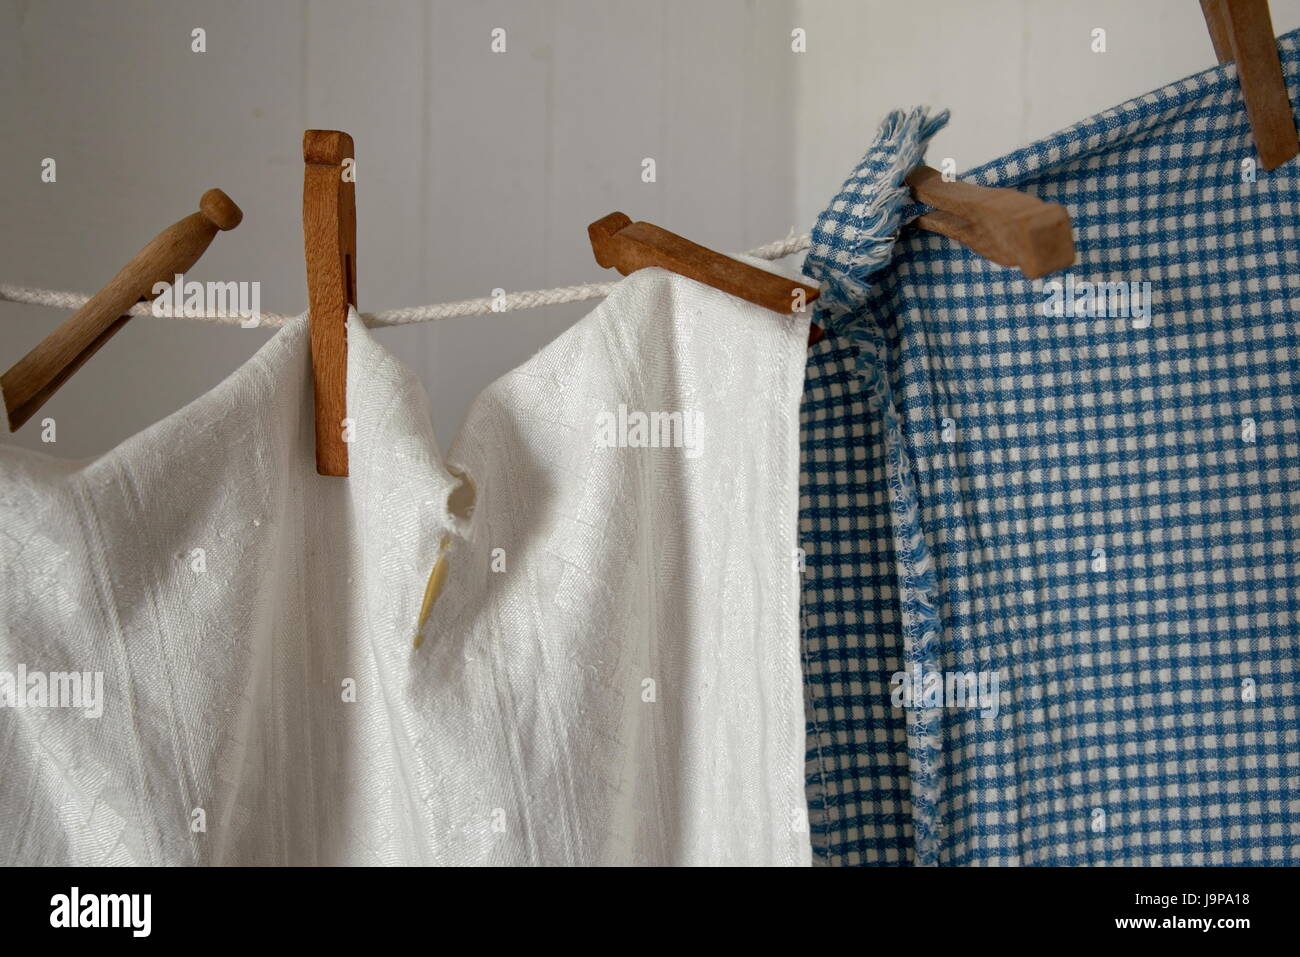 Laundry Line With Clothes Pins Stock Photo